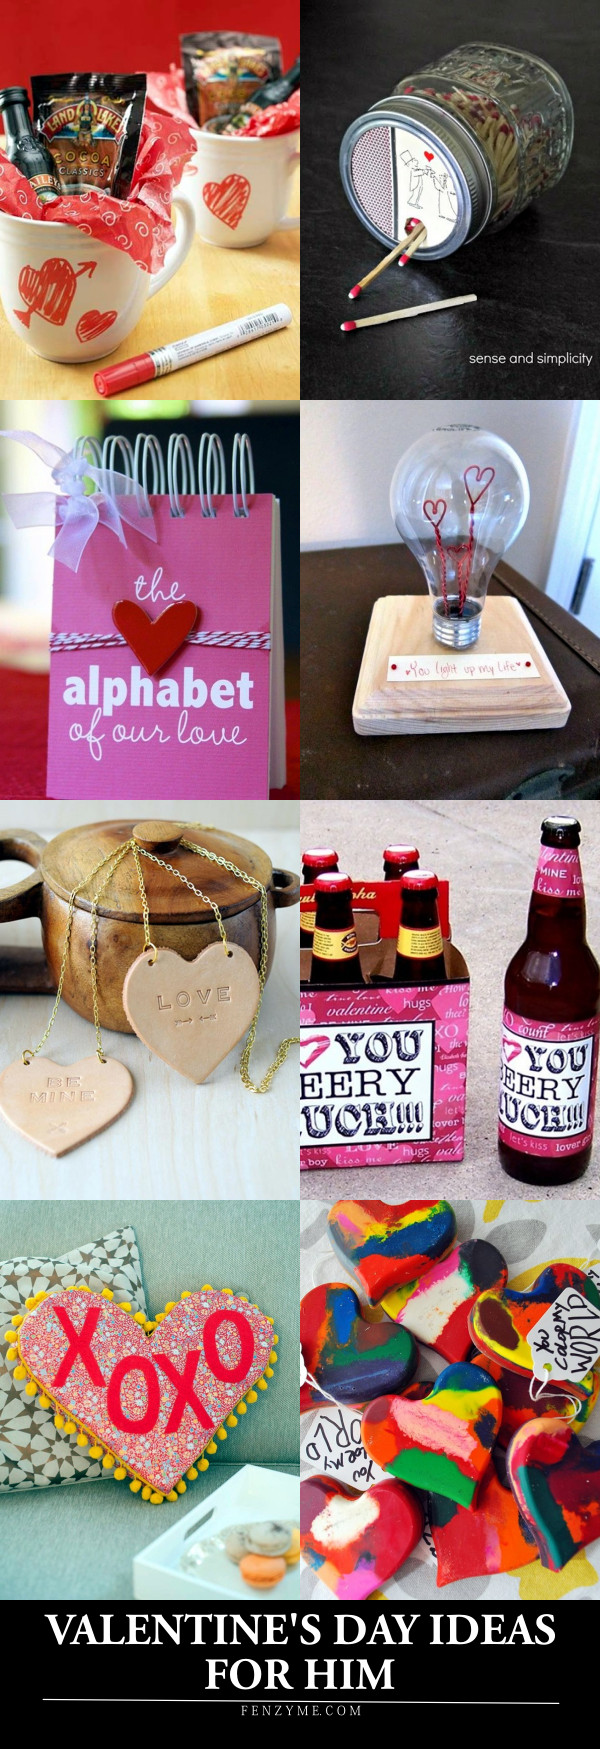 Valentines Gift Ideas For Him Homemade
 101 Homemade Valentines Day Ideas for Him that re really CUTE